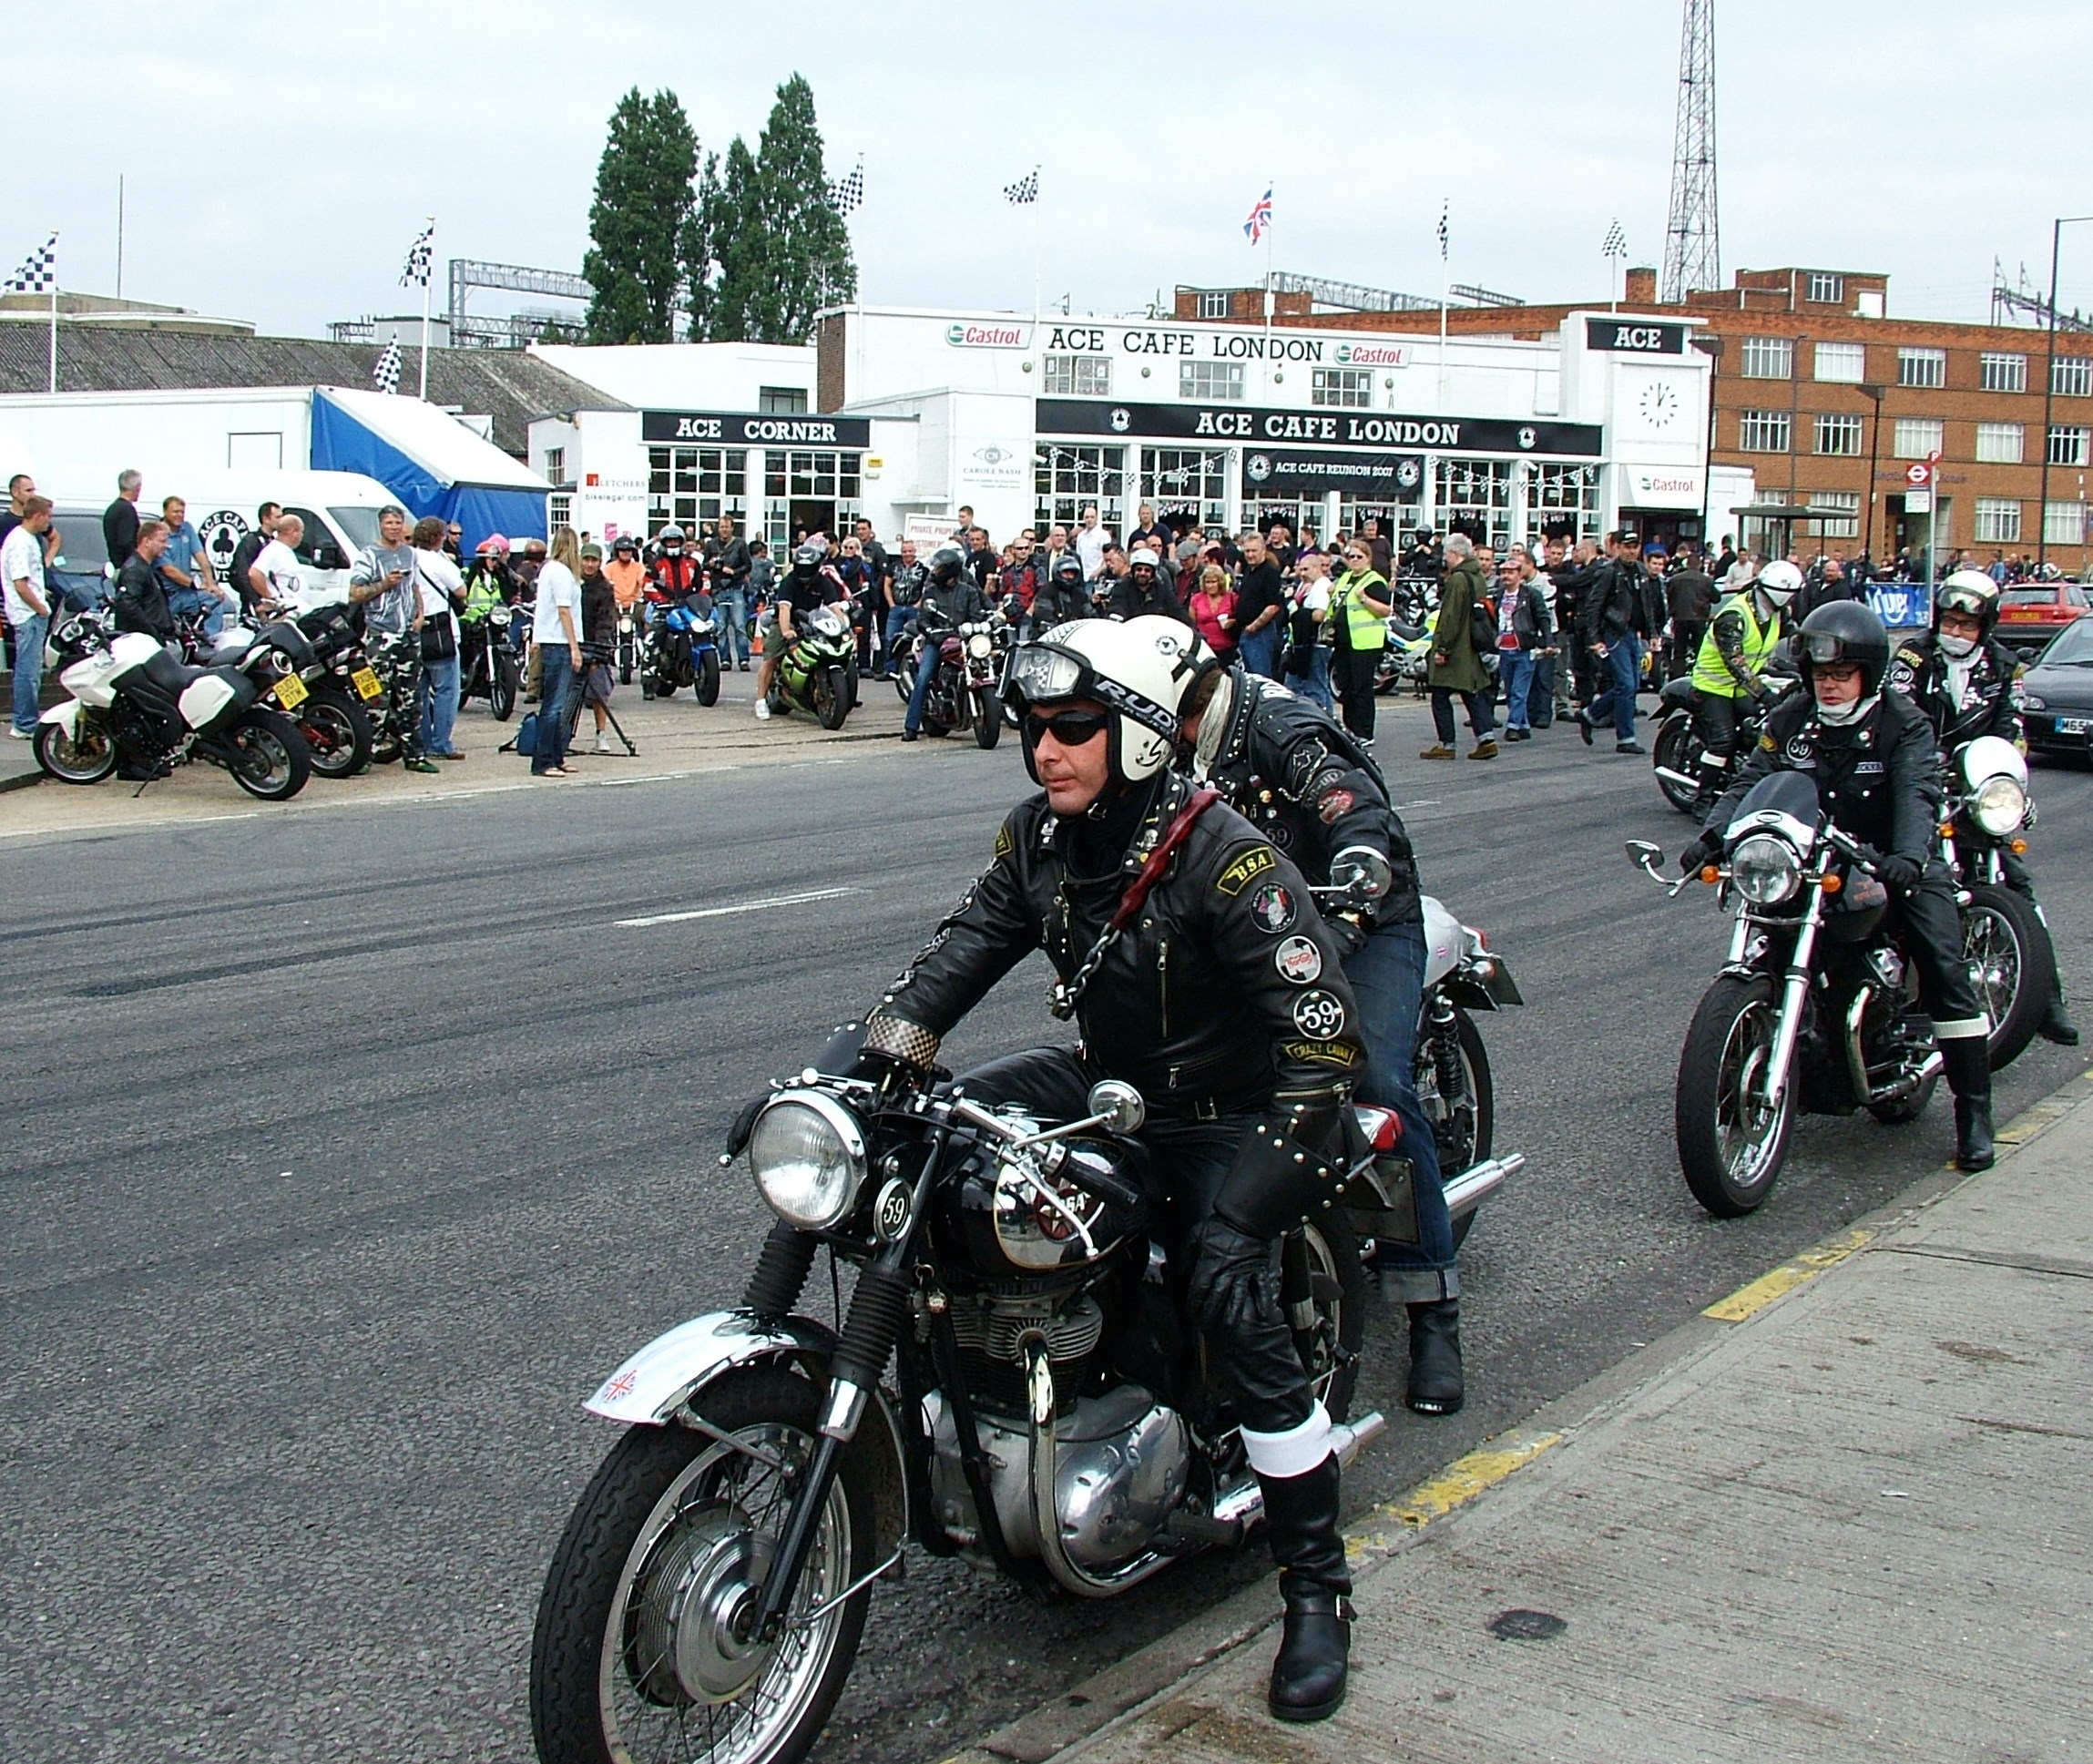 A view of classic and heritage motorcycles